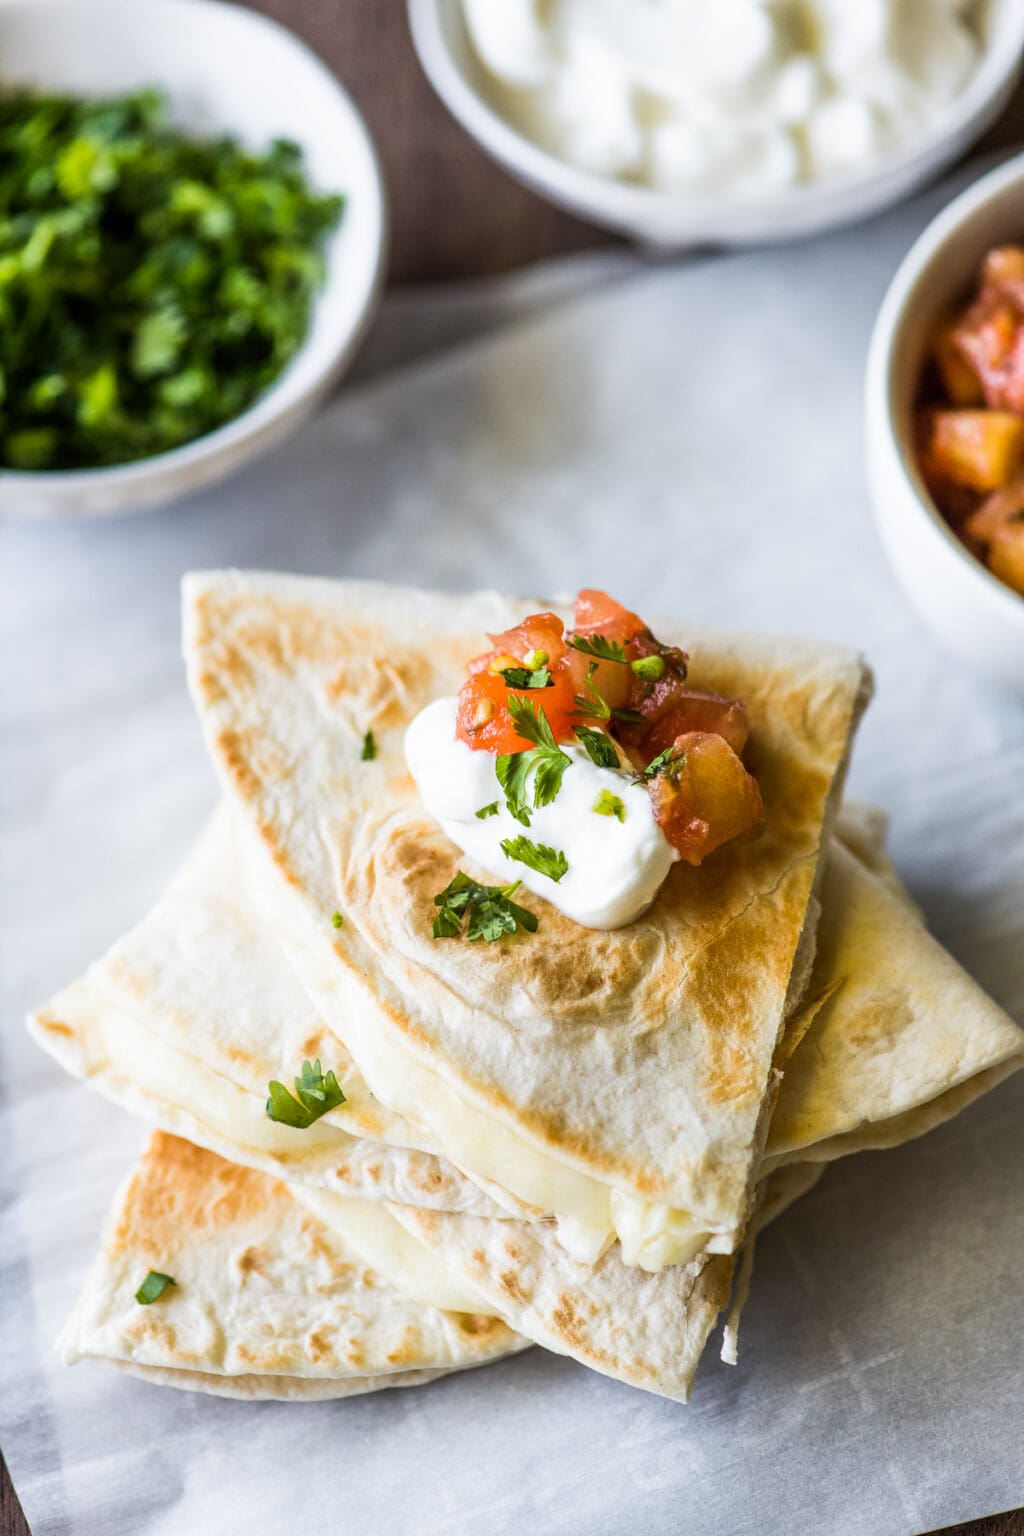 Best Cheese To Make Quesadillas